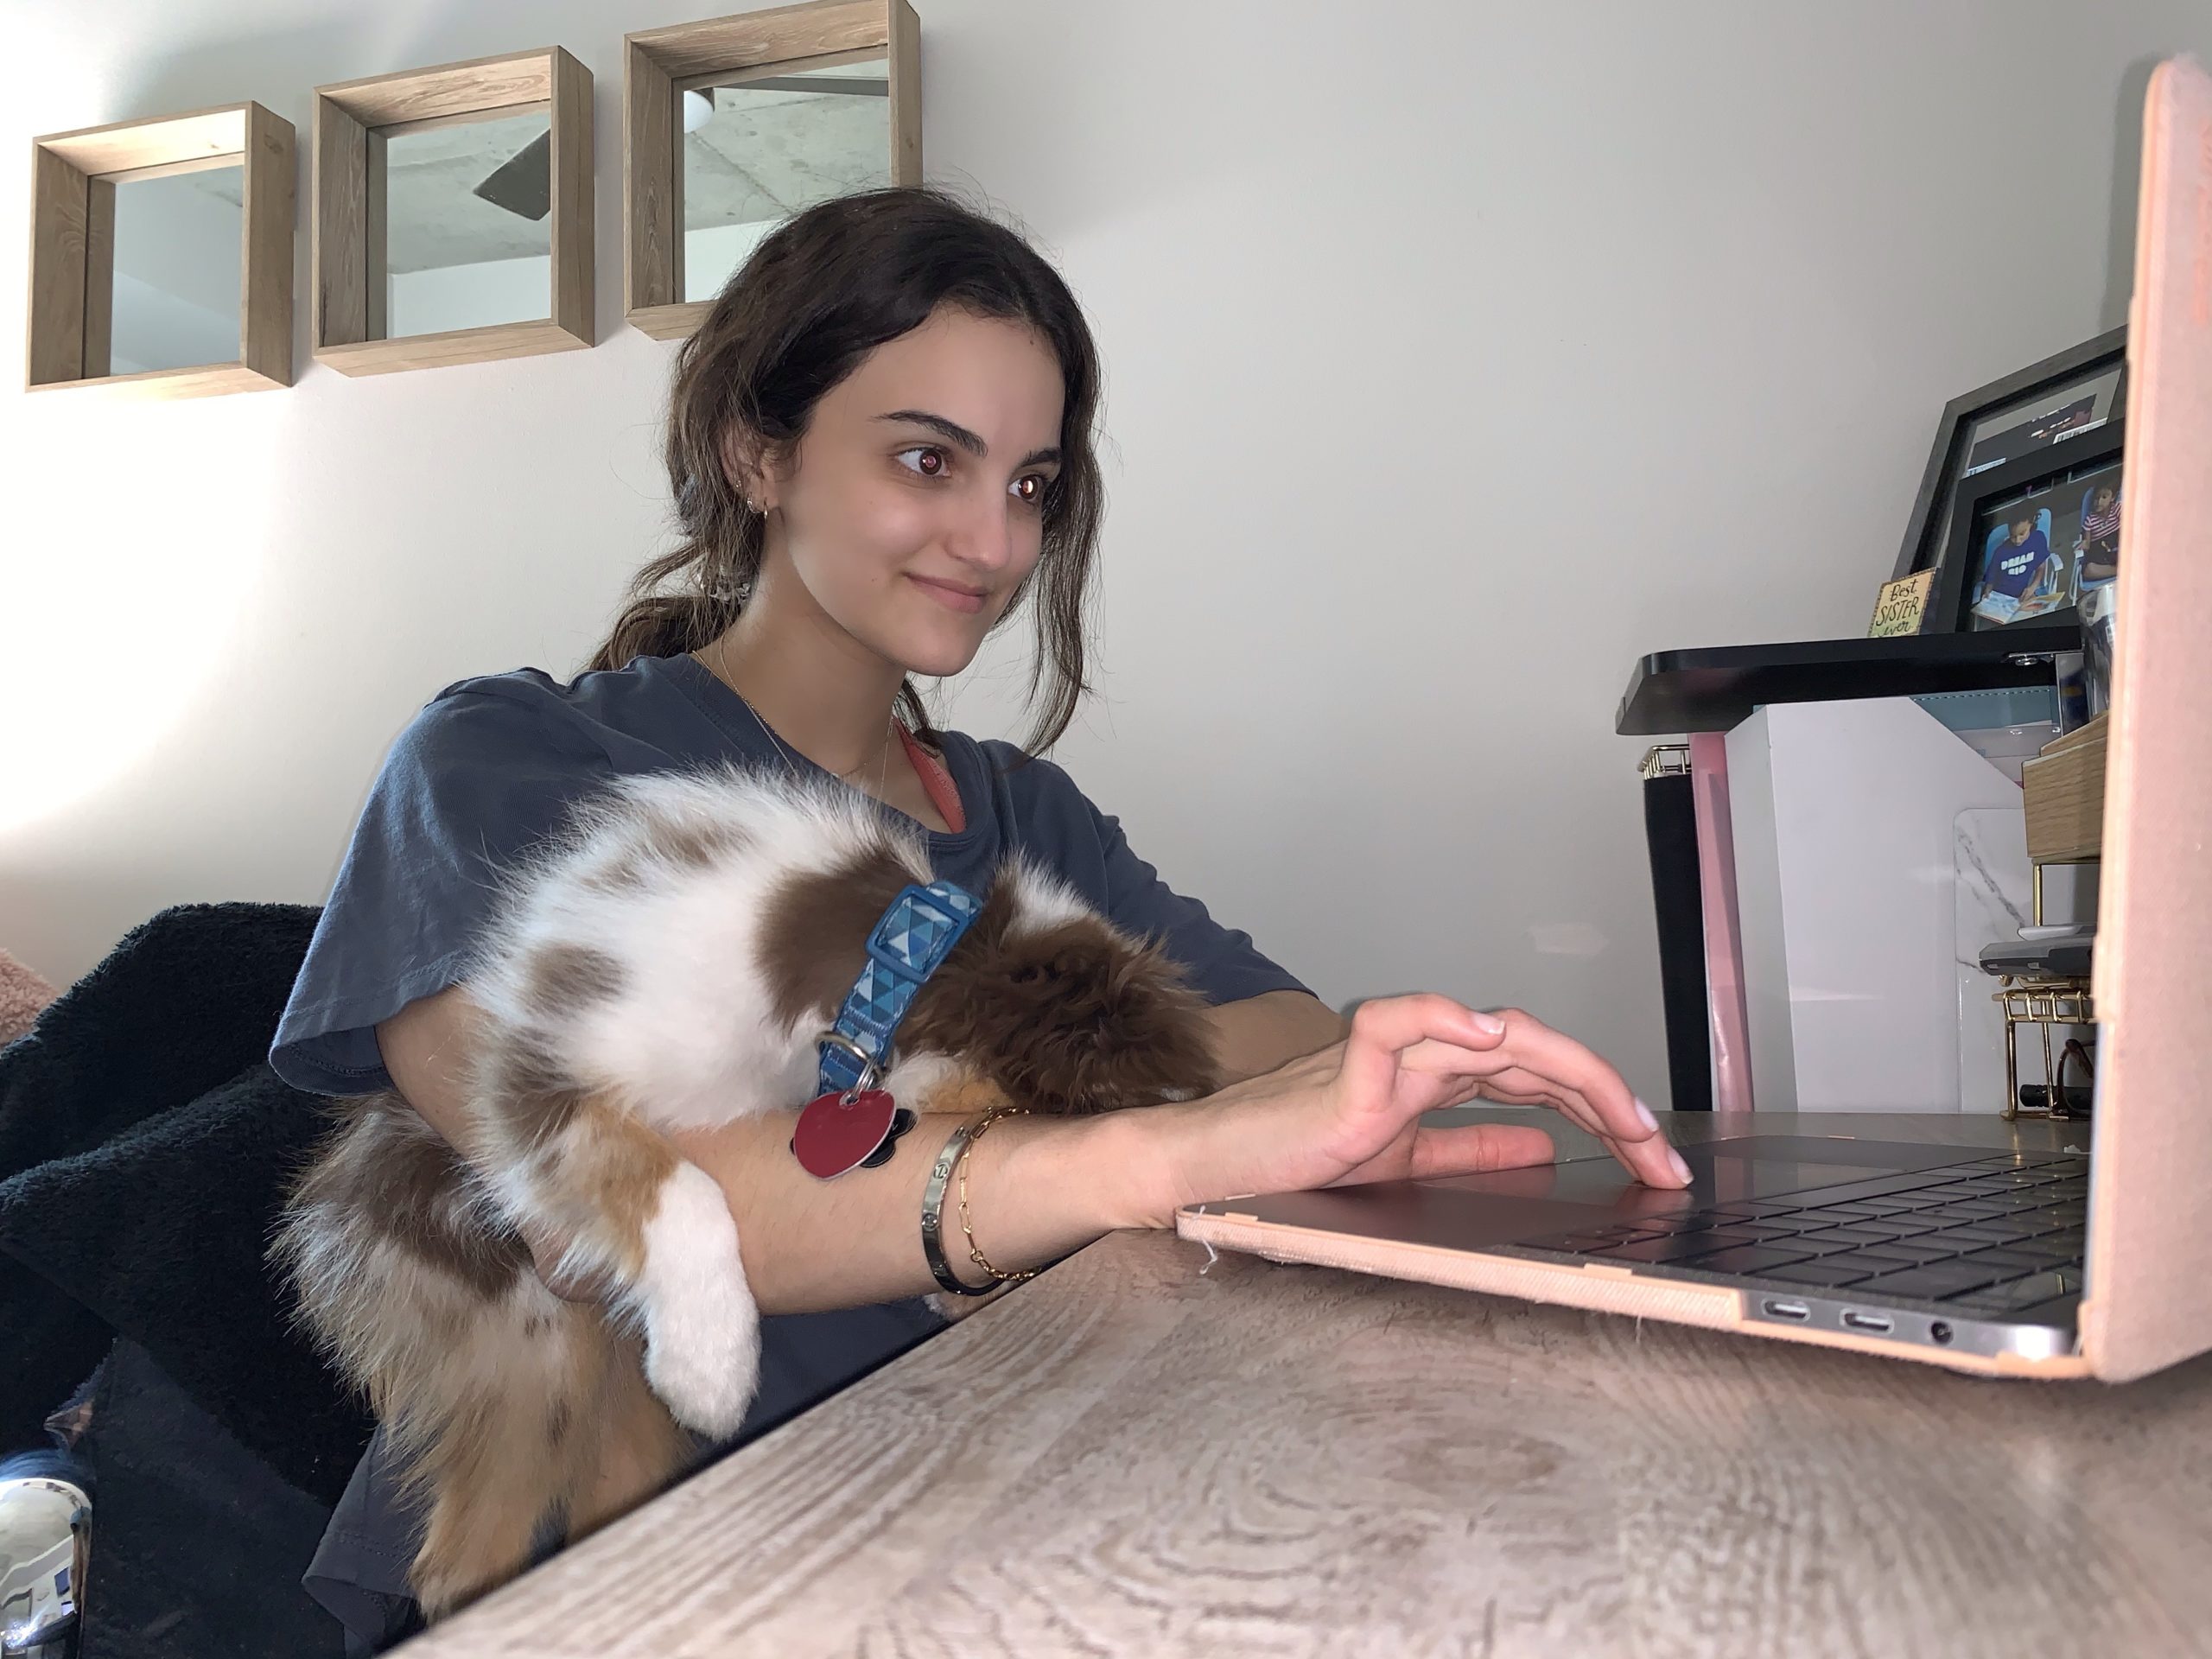 Madison Olson types at her laptop with her dog, Winston